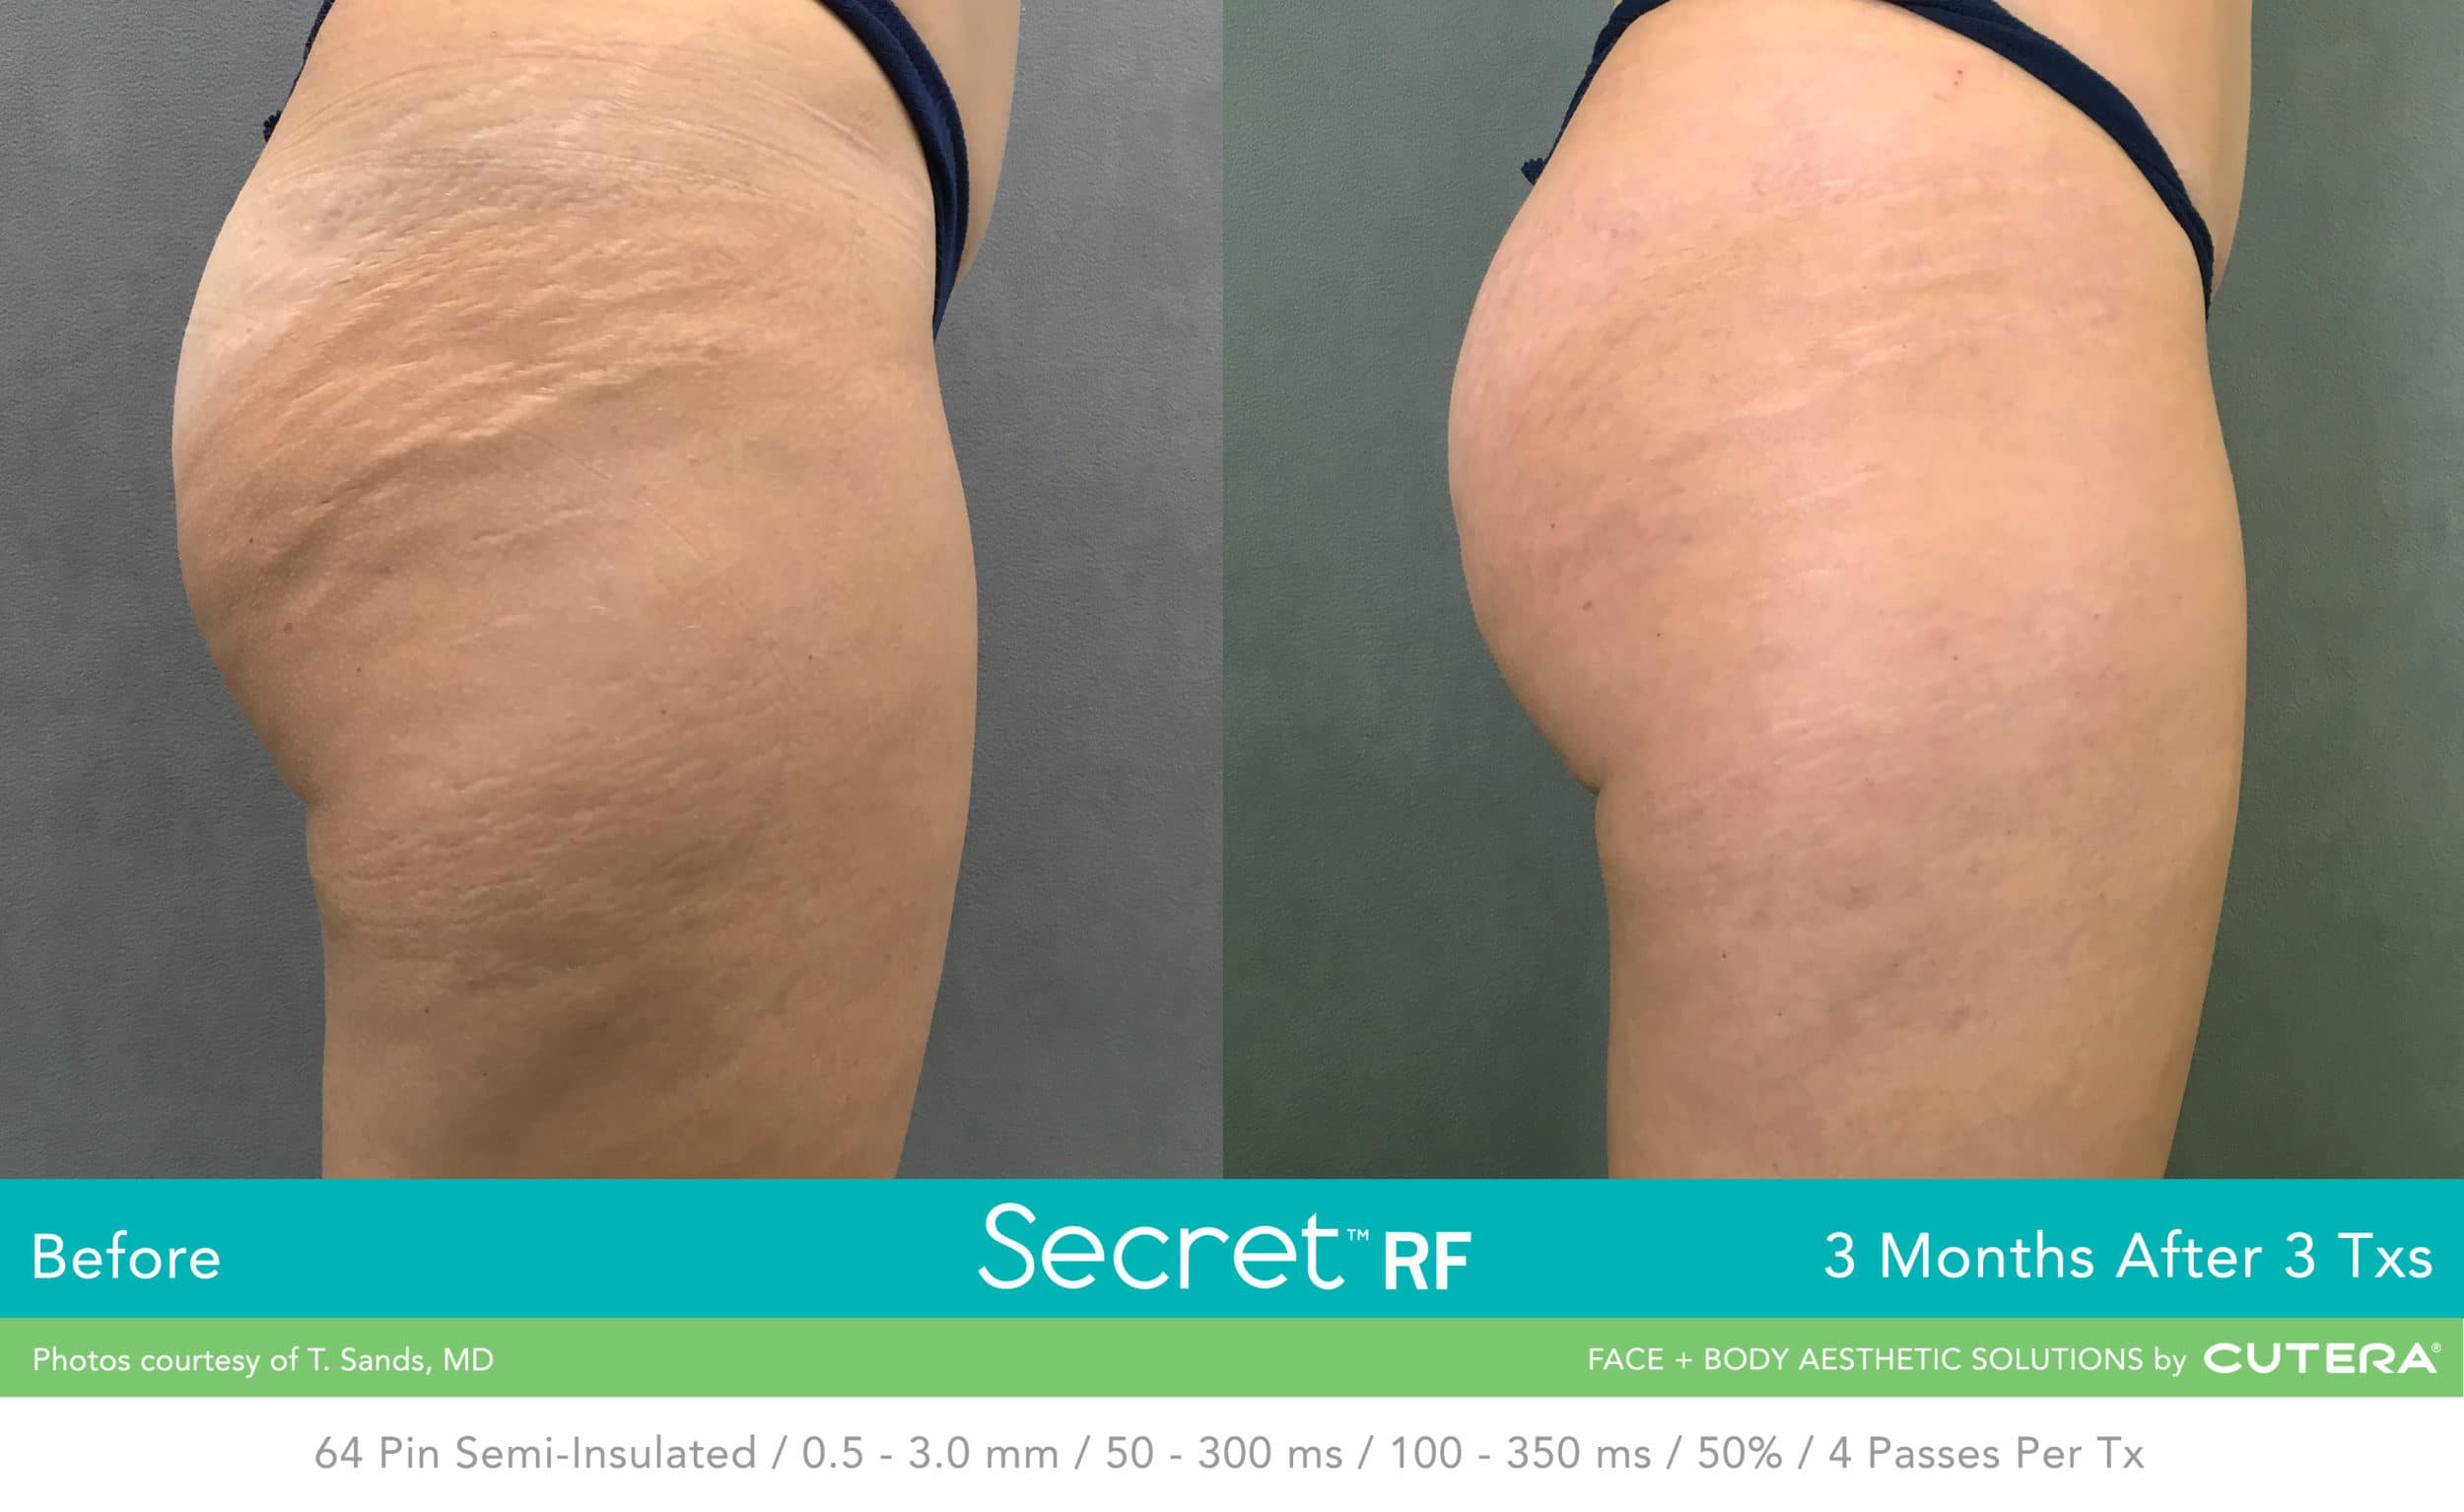 Before & after of woman's legs after Secret RF microneedling.